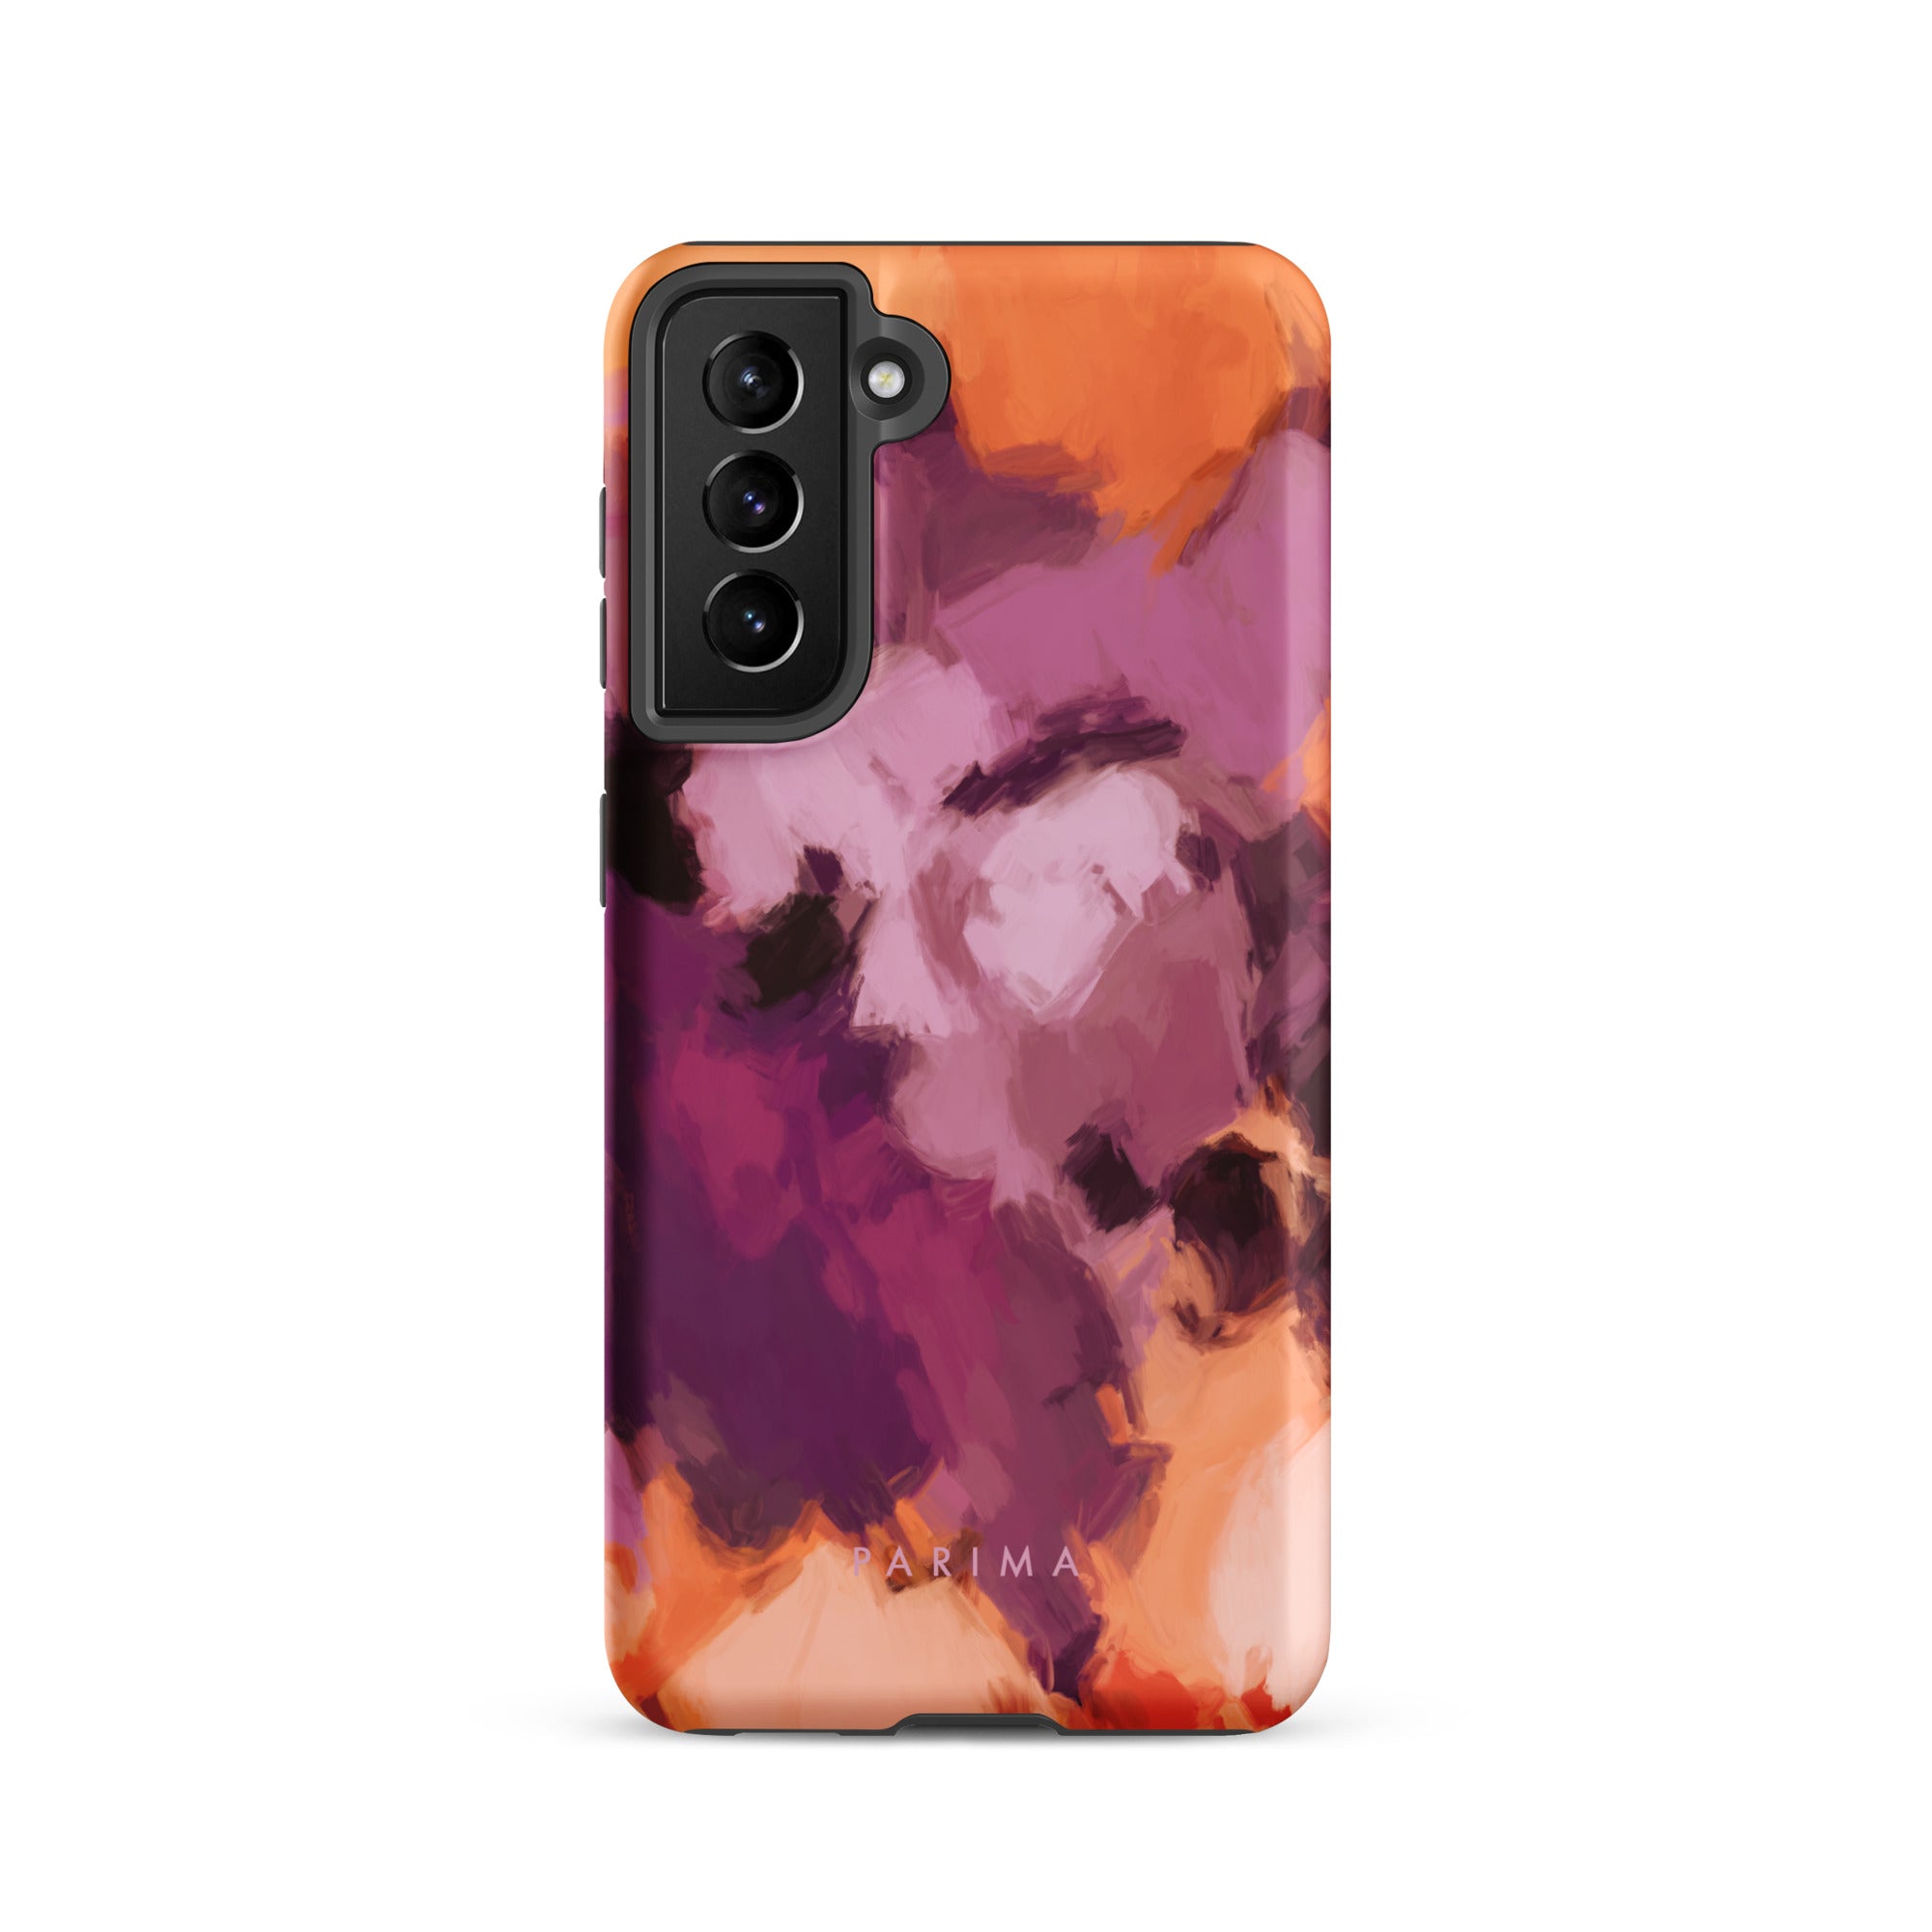 Lilac, purple and orange abstract art on Samsung Galaxy S21 tough case by Parima Studio